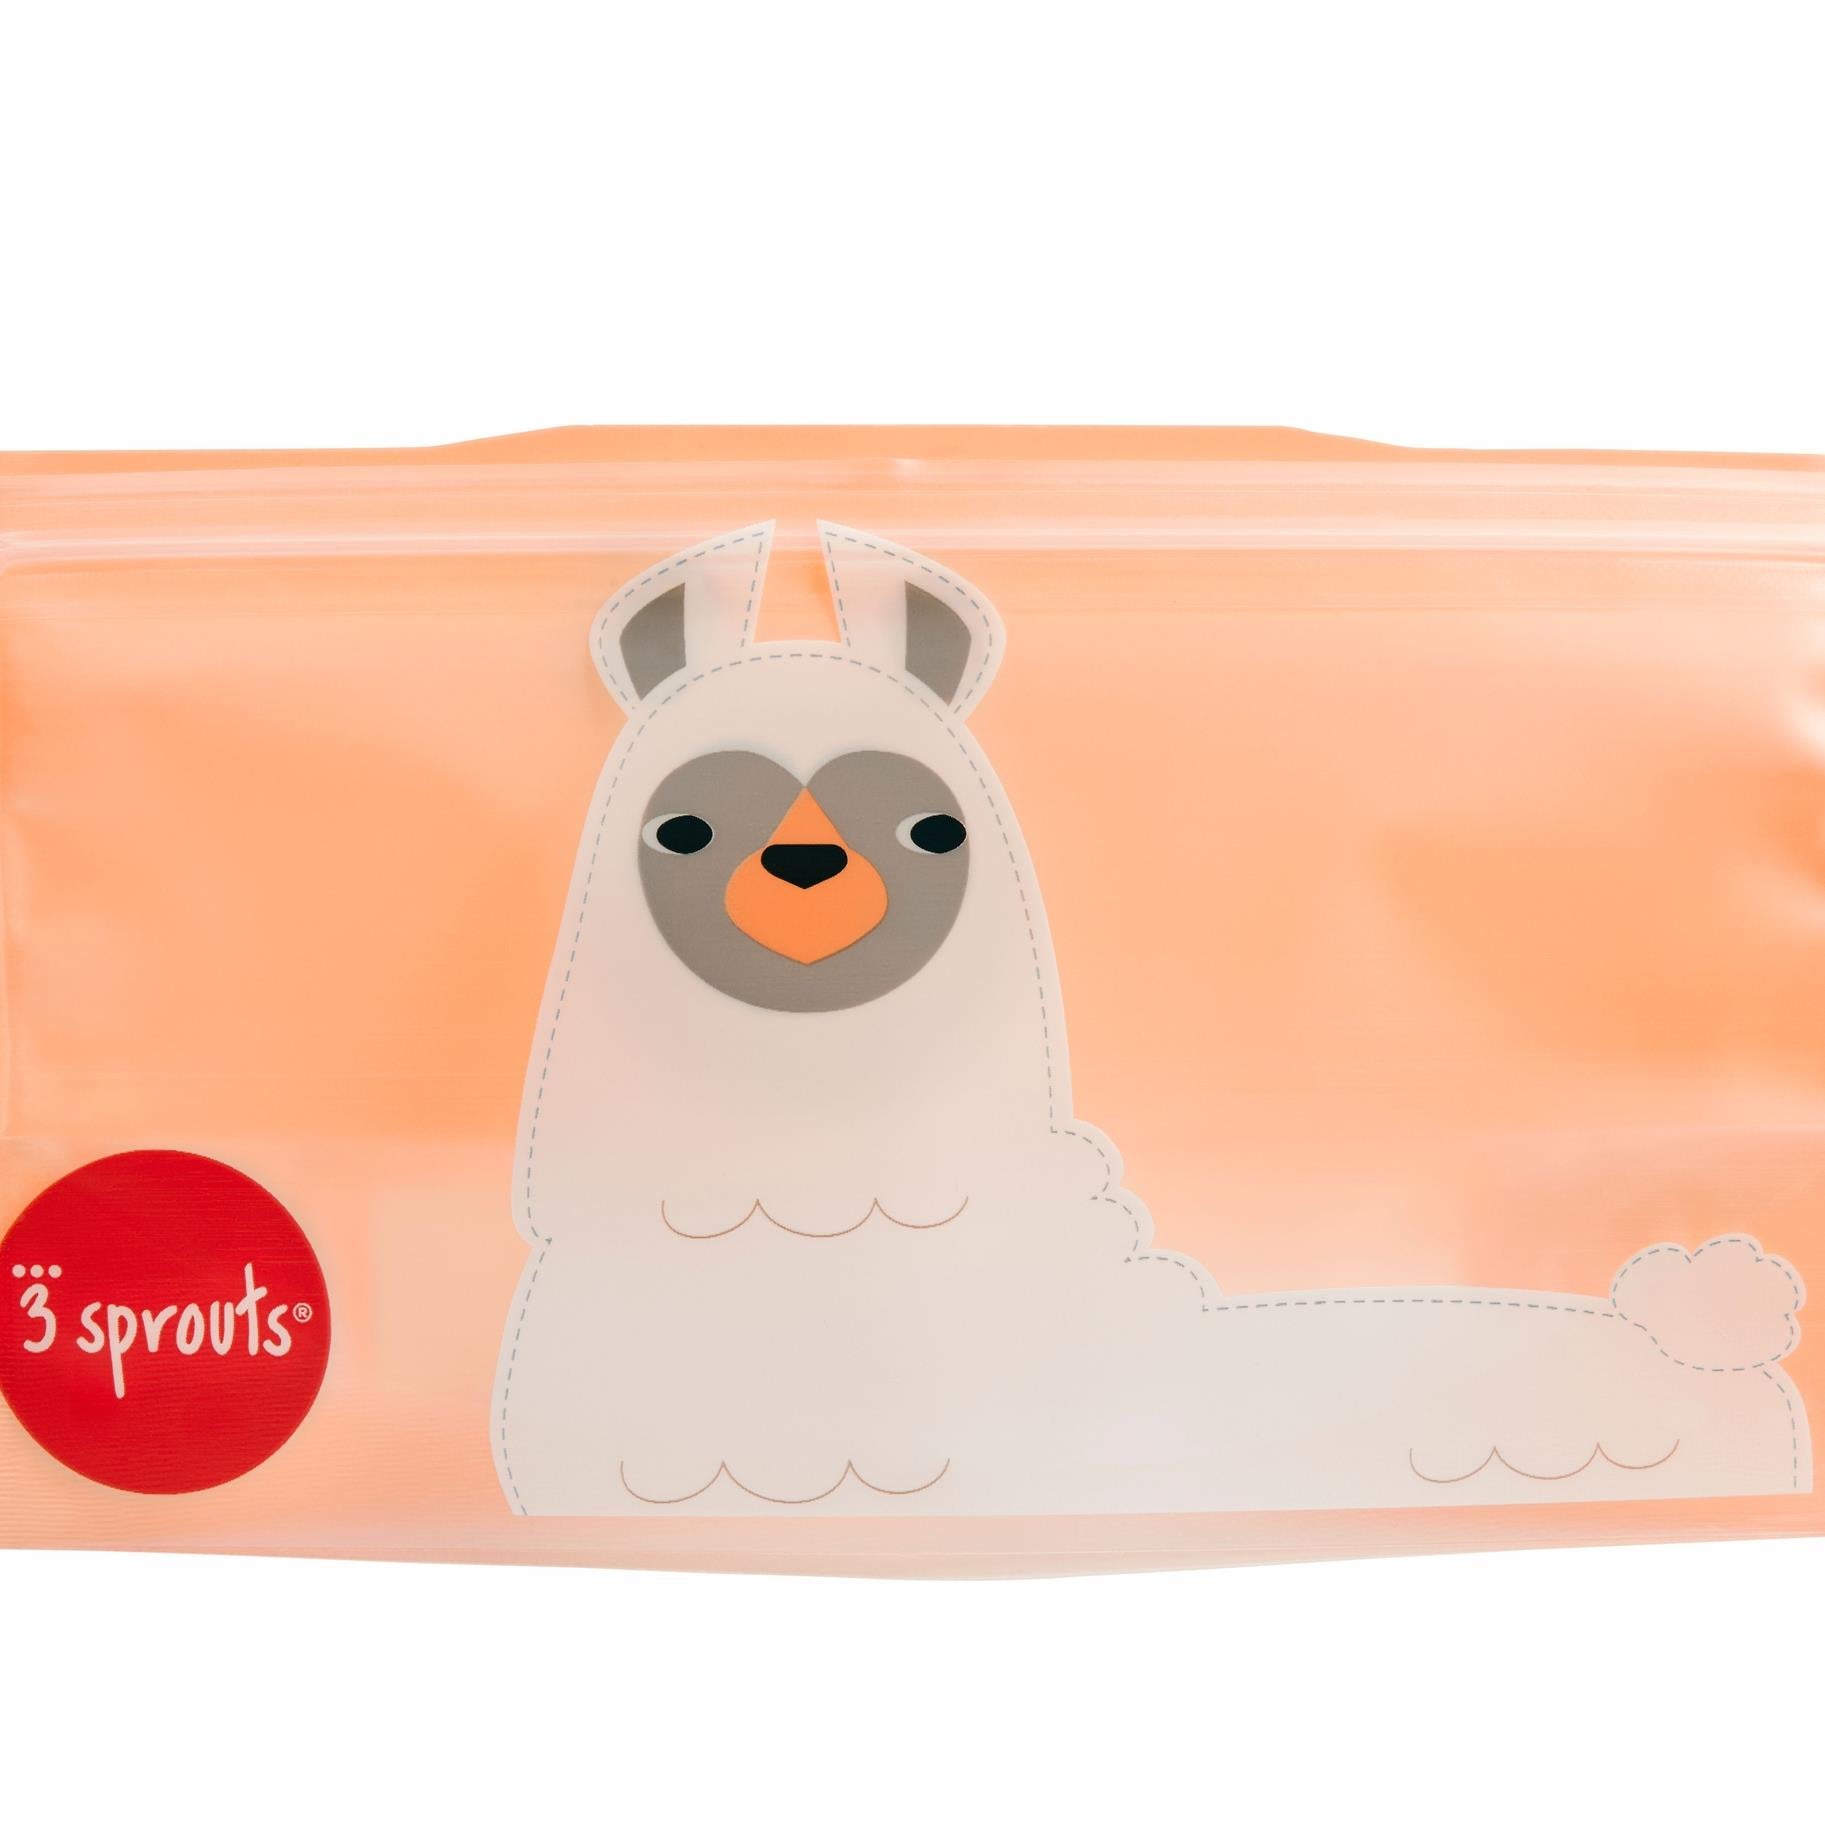 3 Sprouts Llama Snack Bags (2 Pack)